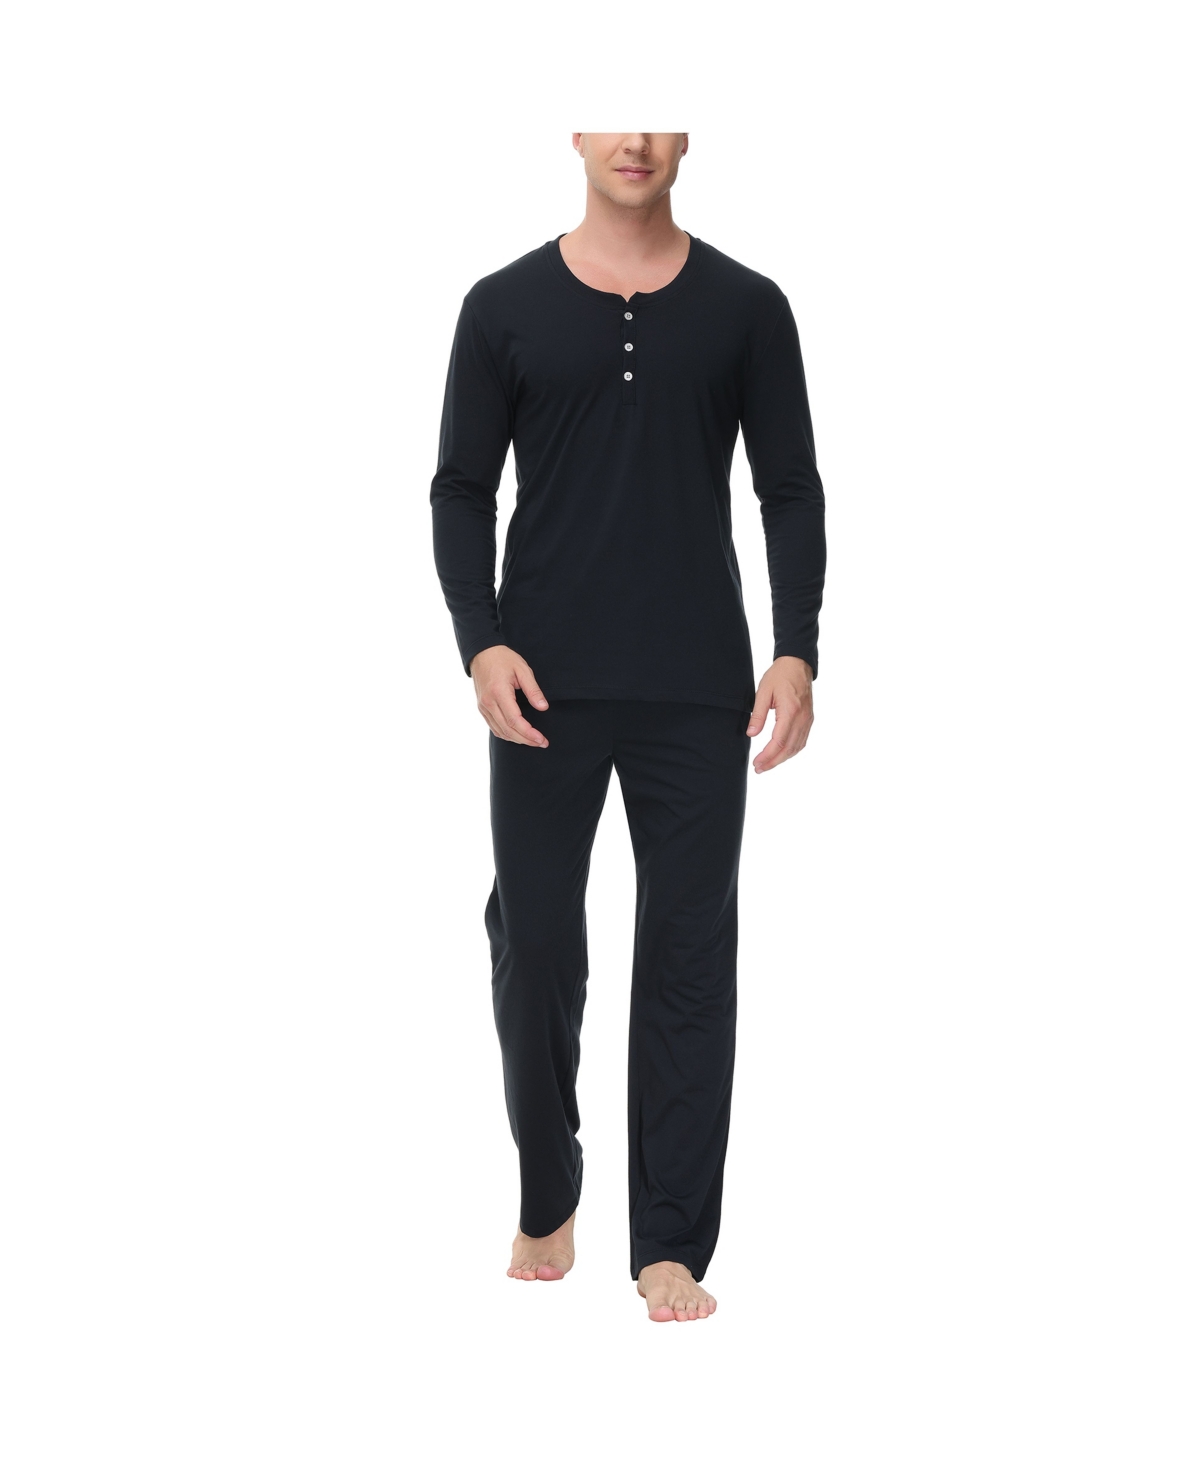 Men's Two Piece Henley Pajama Set - Red